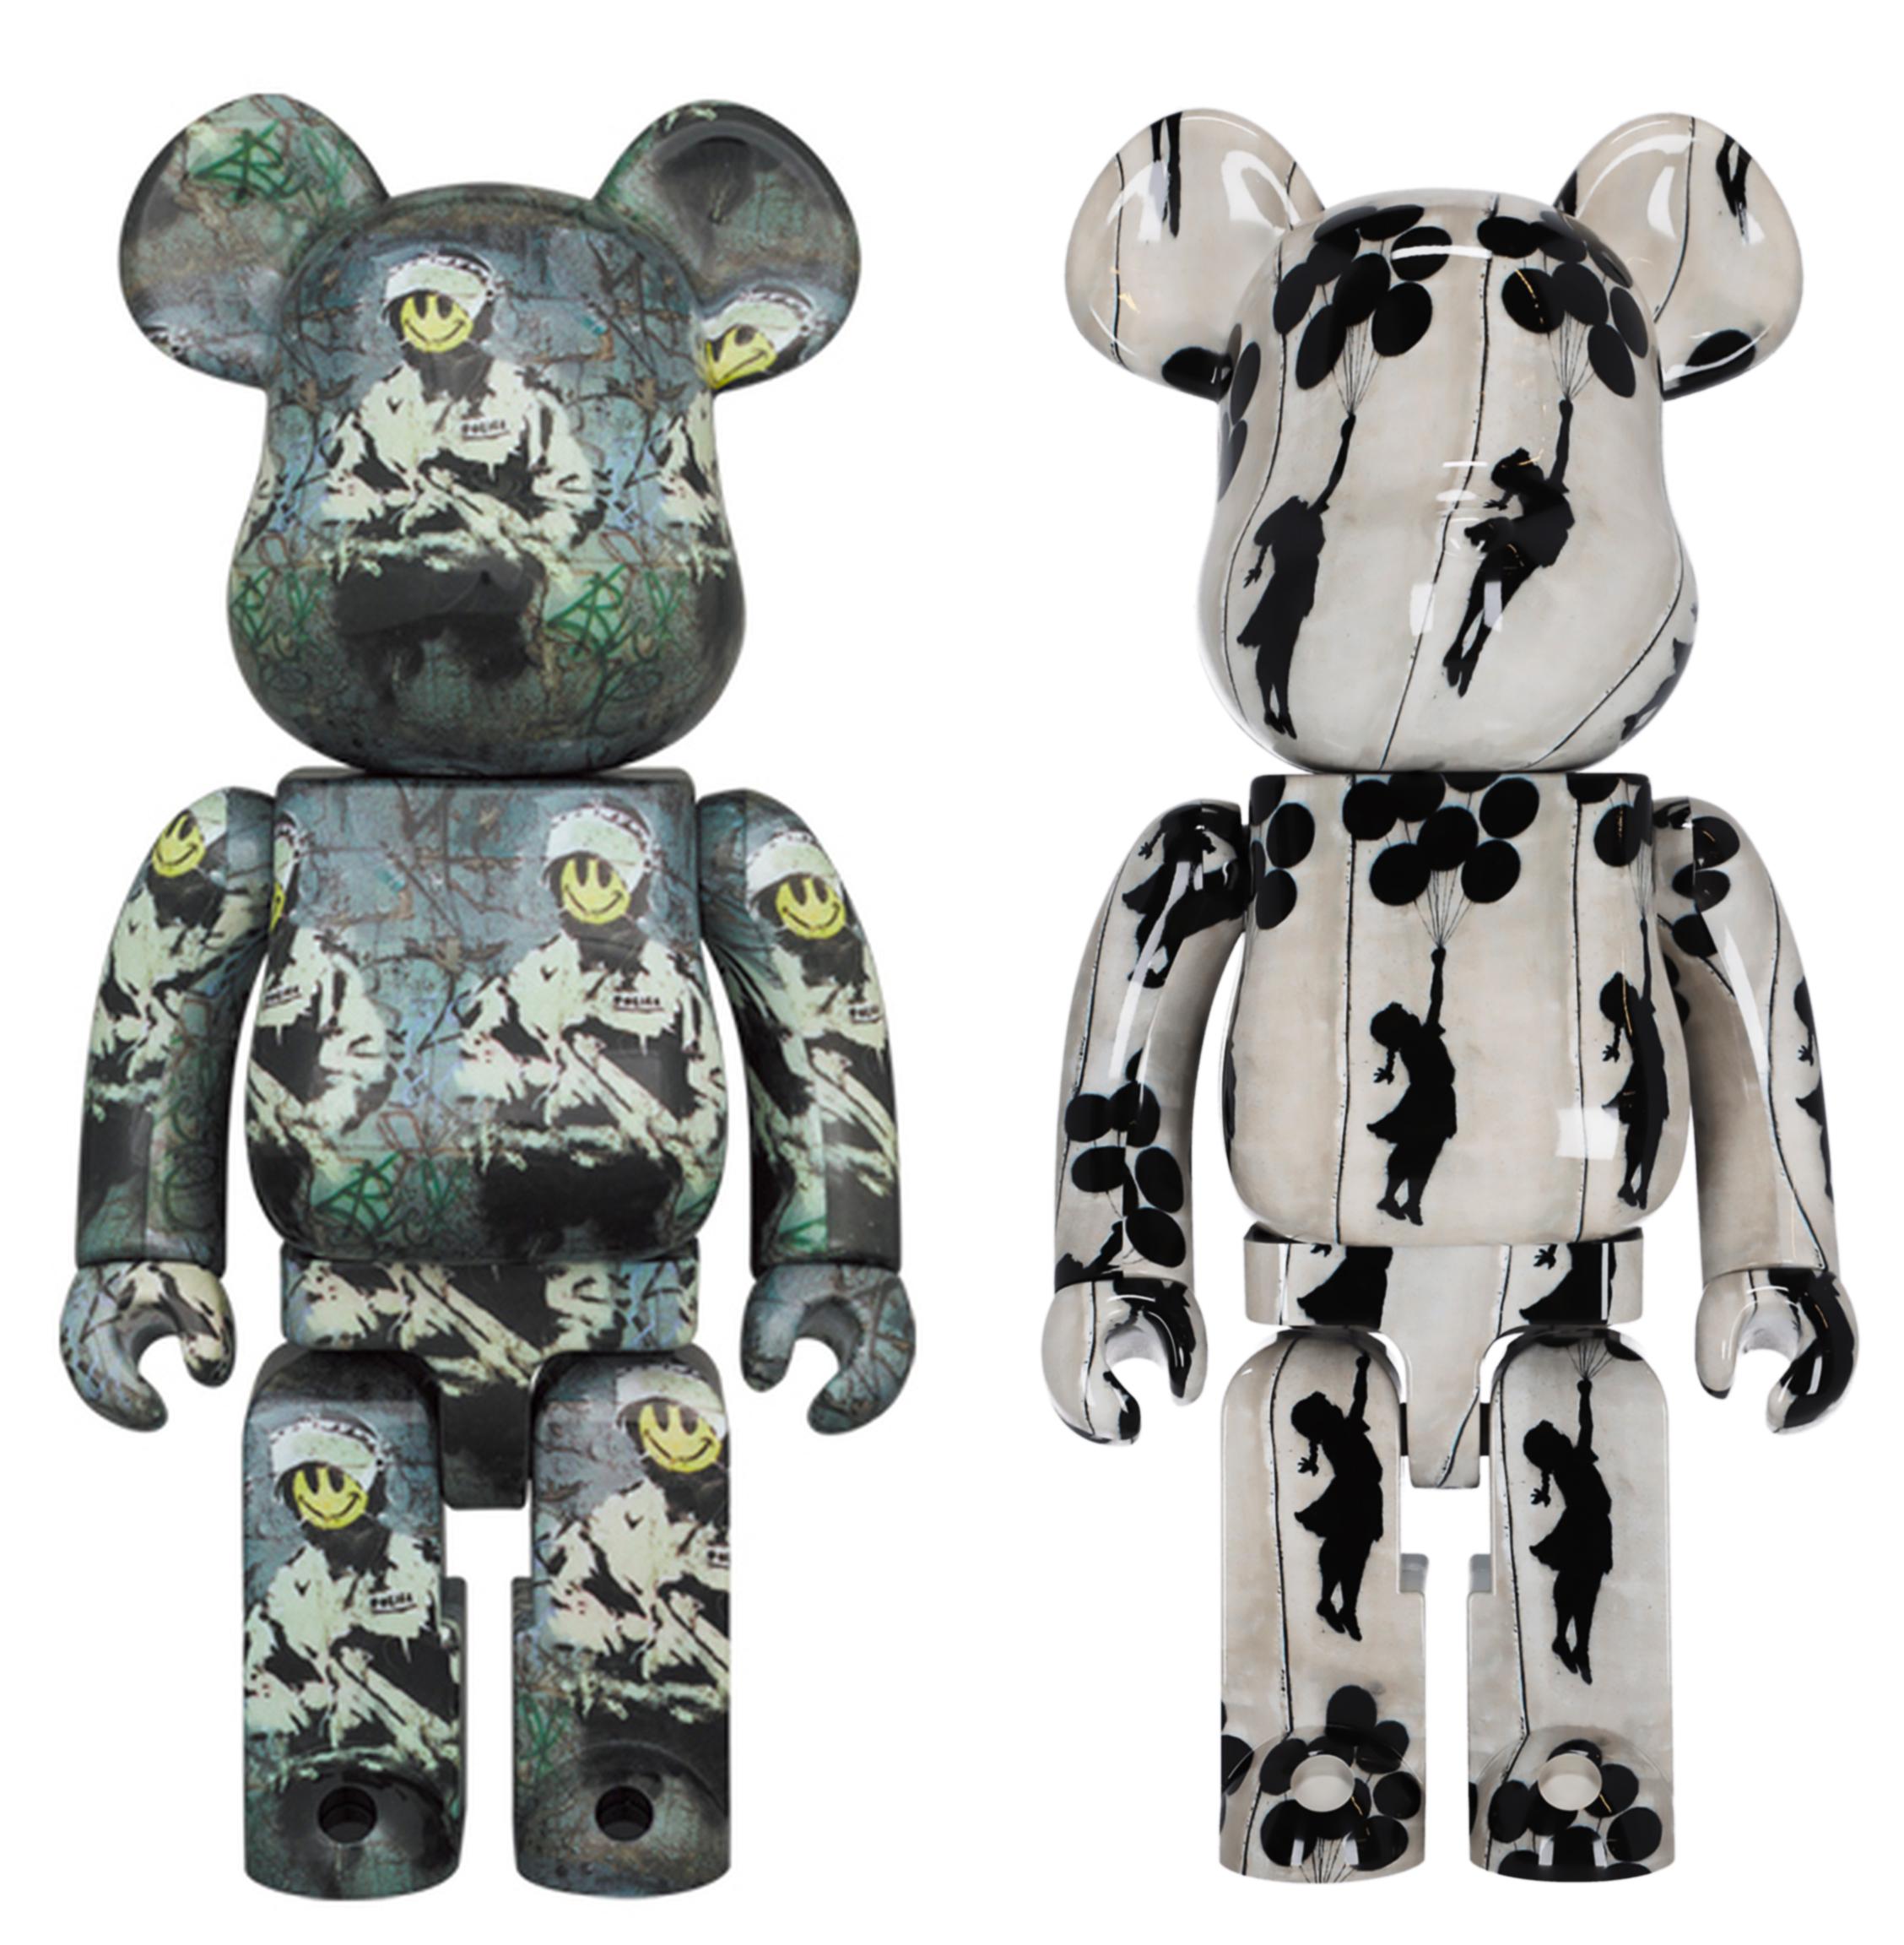 Bearbrick 400% Riot Cop & Flying Balloons Girl set (after Banksy BE@RBRICK)